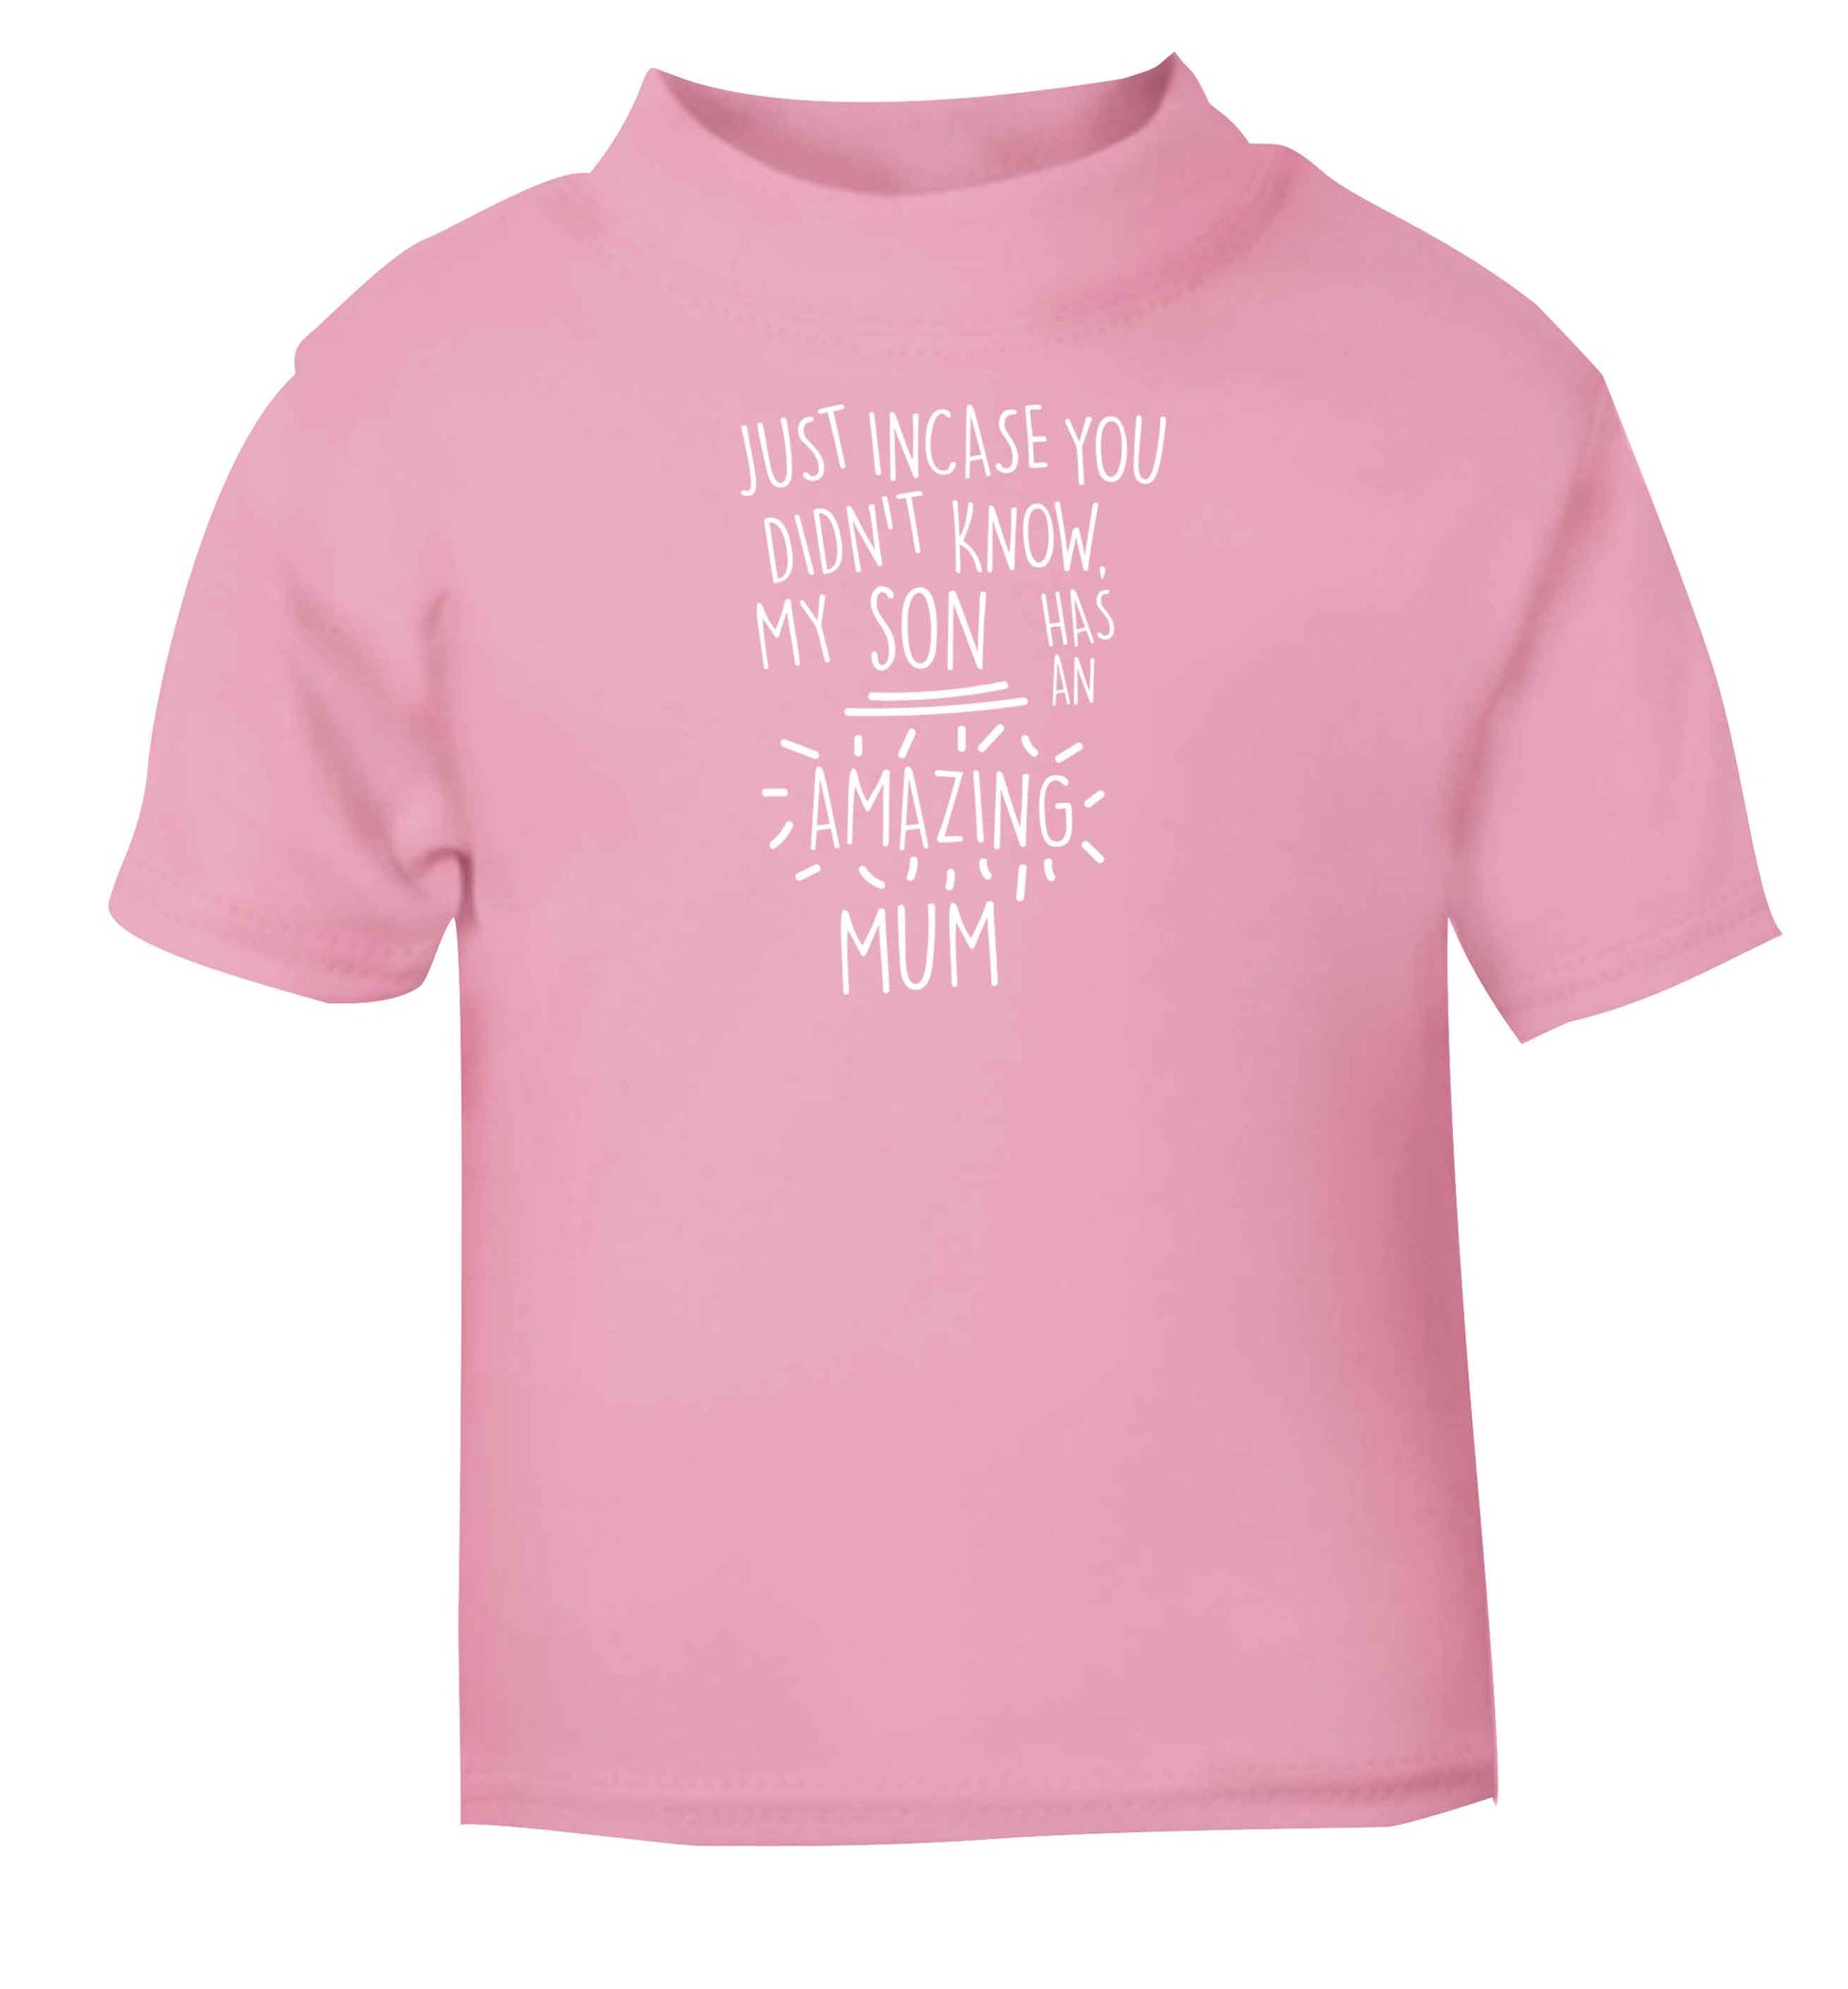 Just incase you didn't know my son has an amazing mum Children's light pink Tshirt 12-13 Years